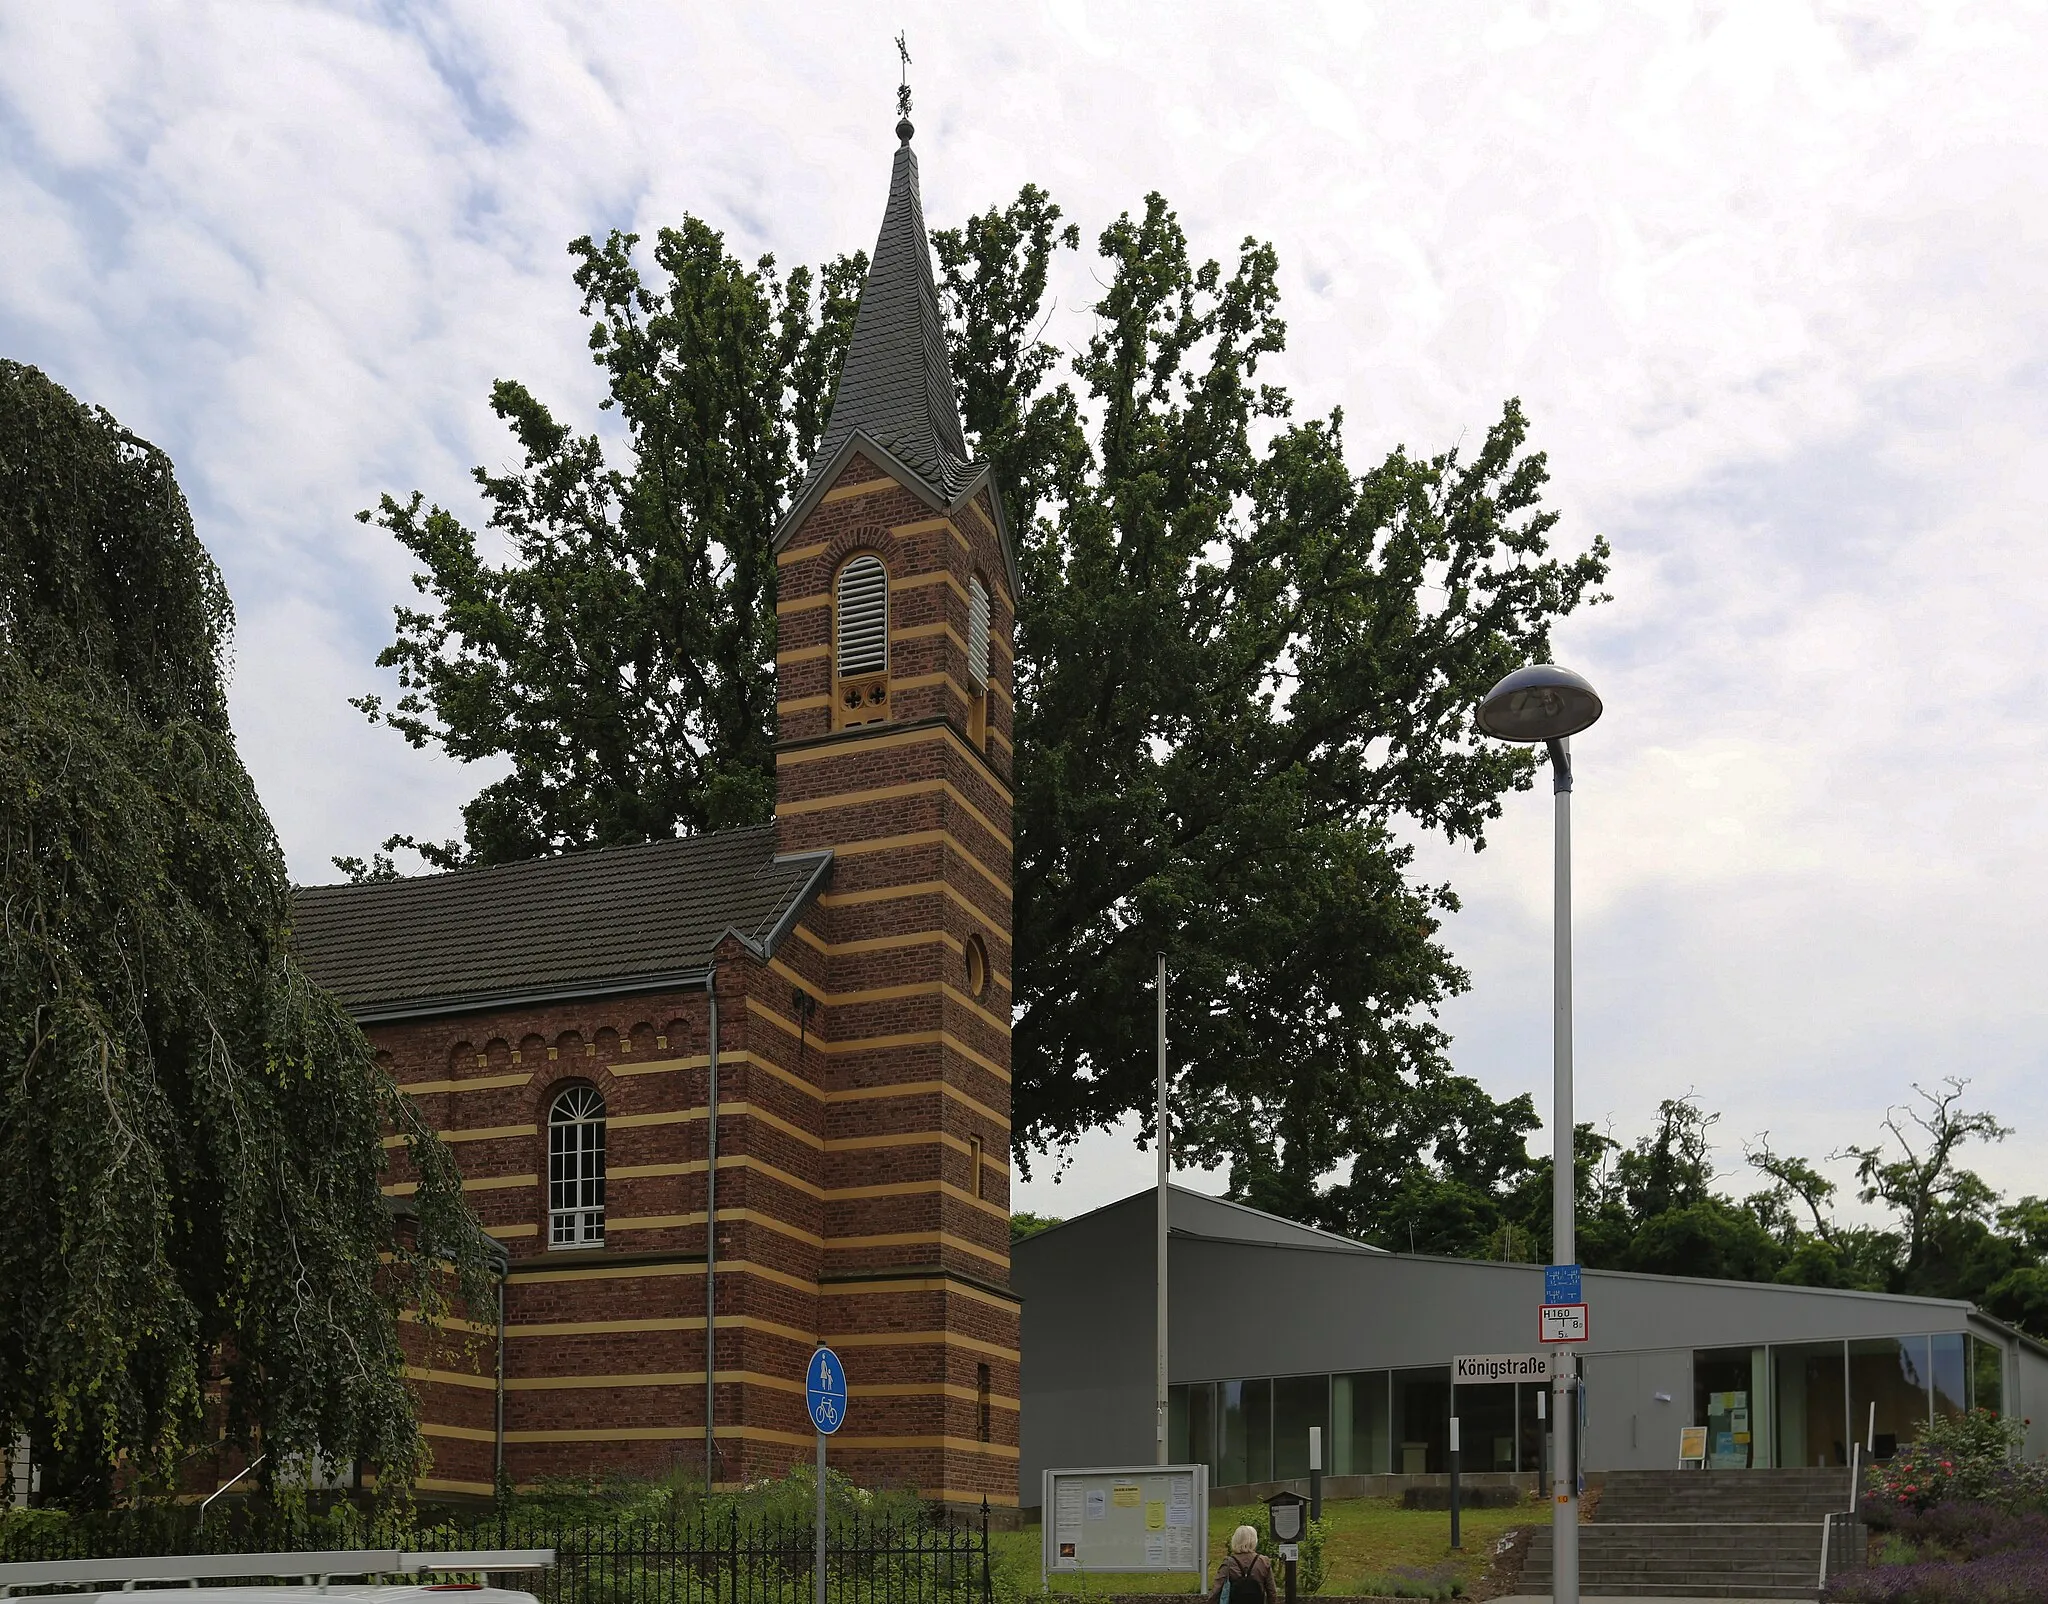 Photo showing: The old (neoromanic of 1866) and new modern Evangelic church in Bornheim, Germany